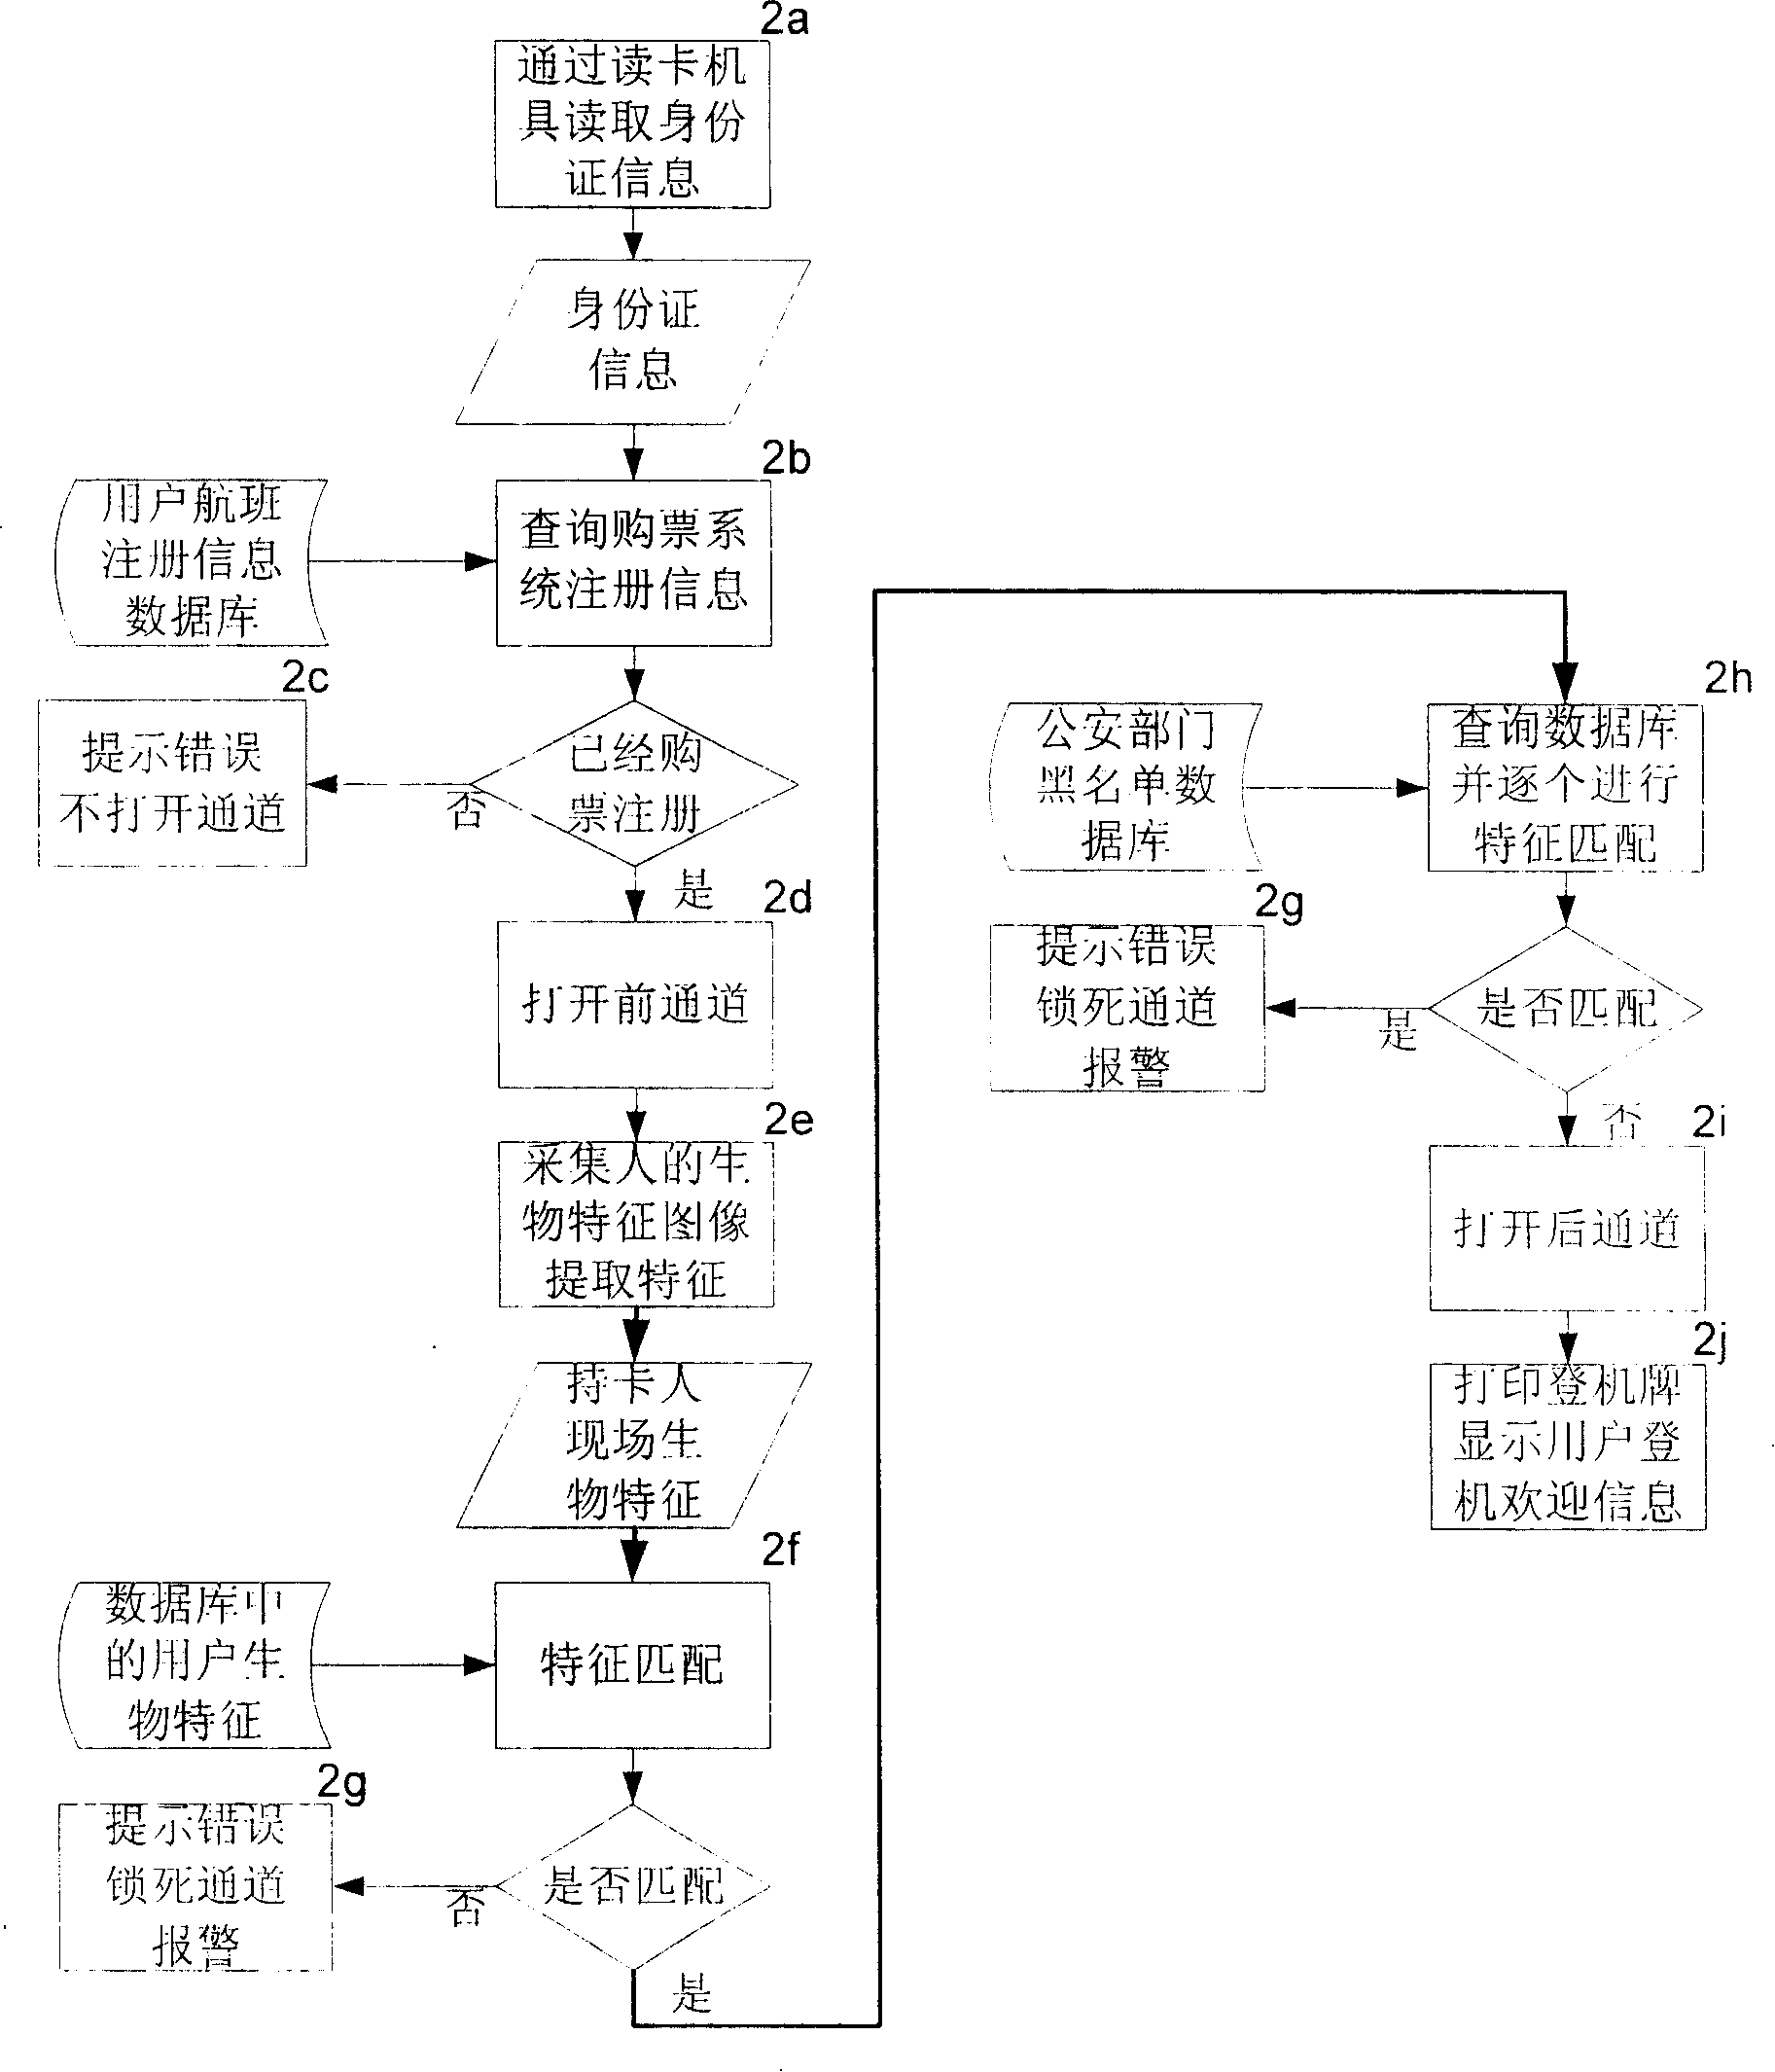 Rapid go-aboard system and method based on id card and biological characteristic recognition technique